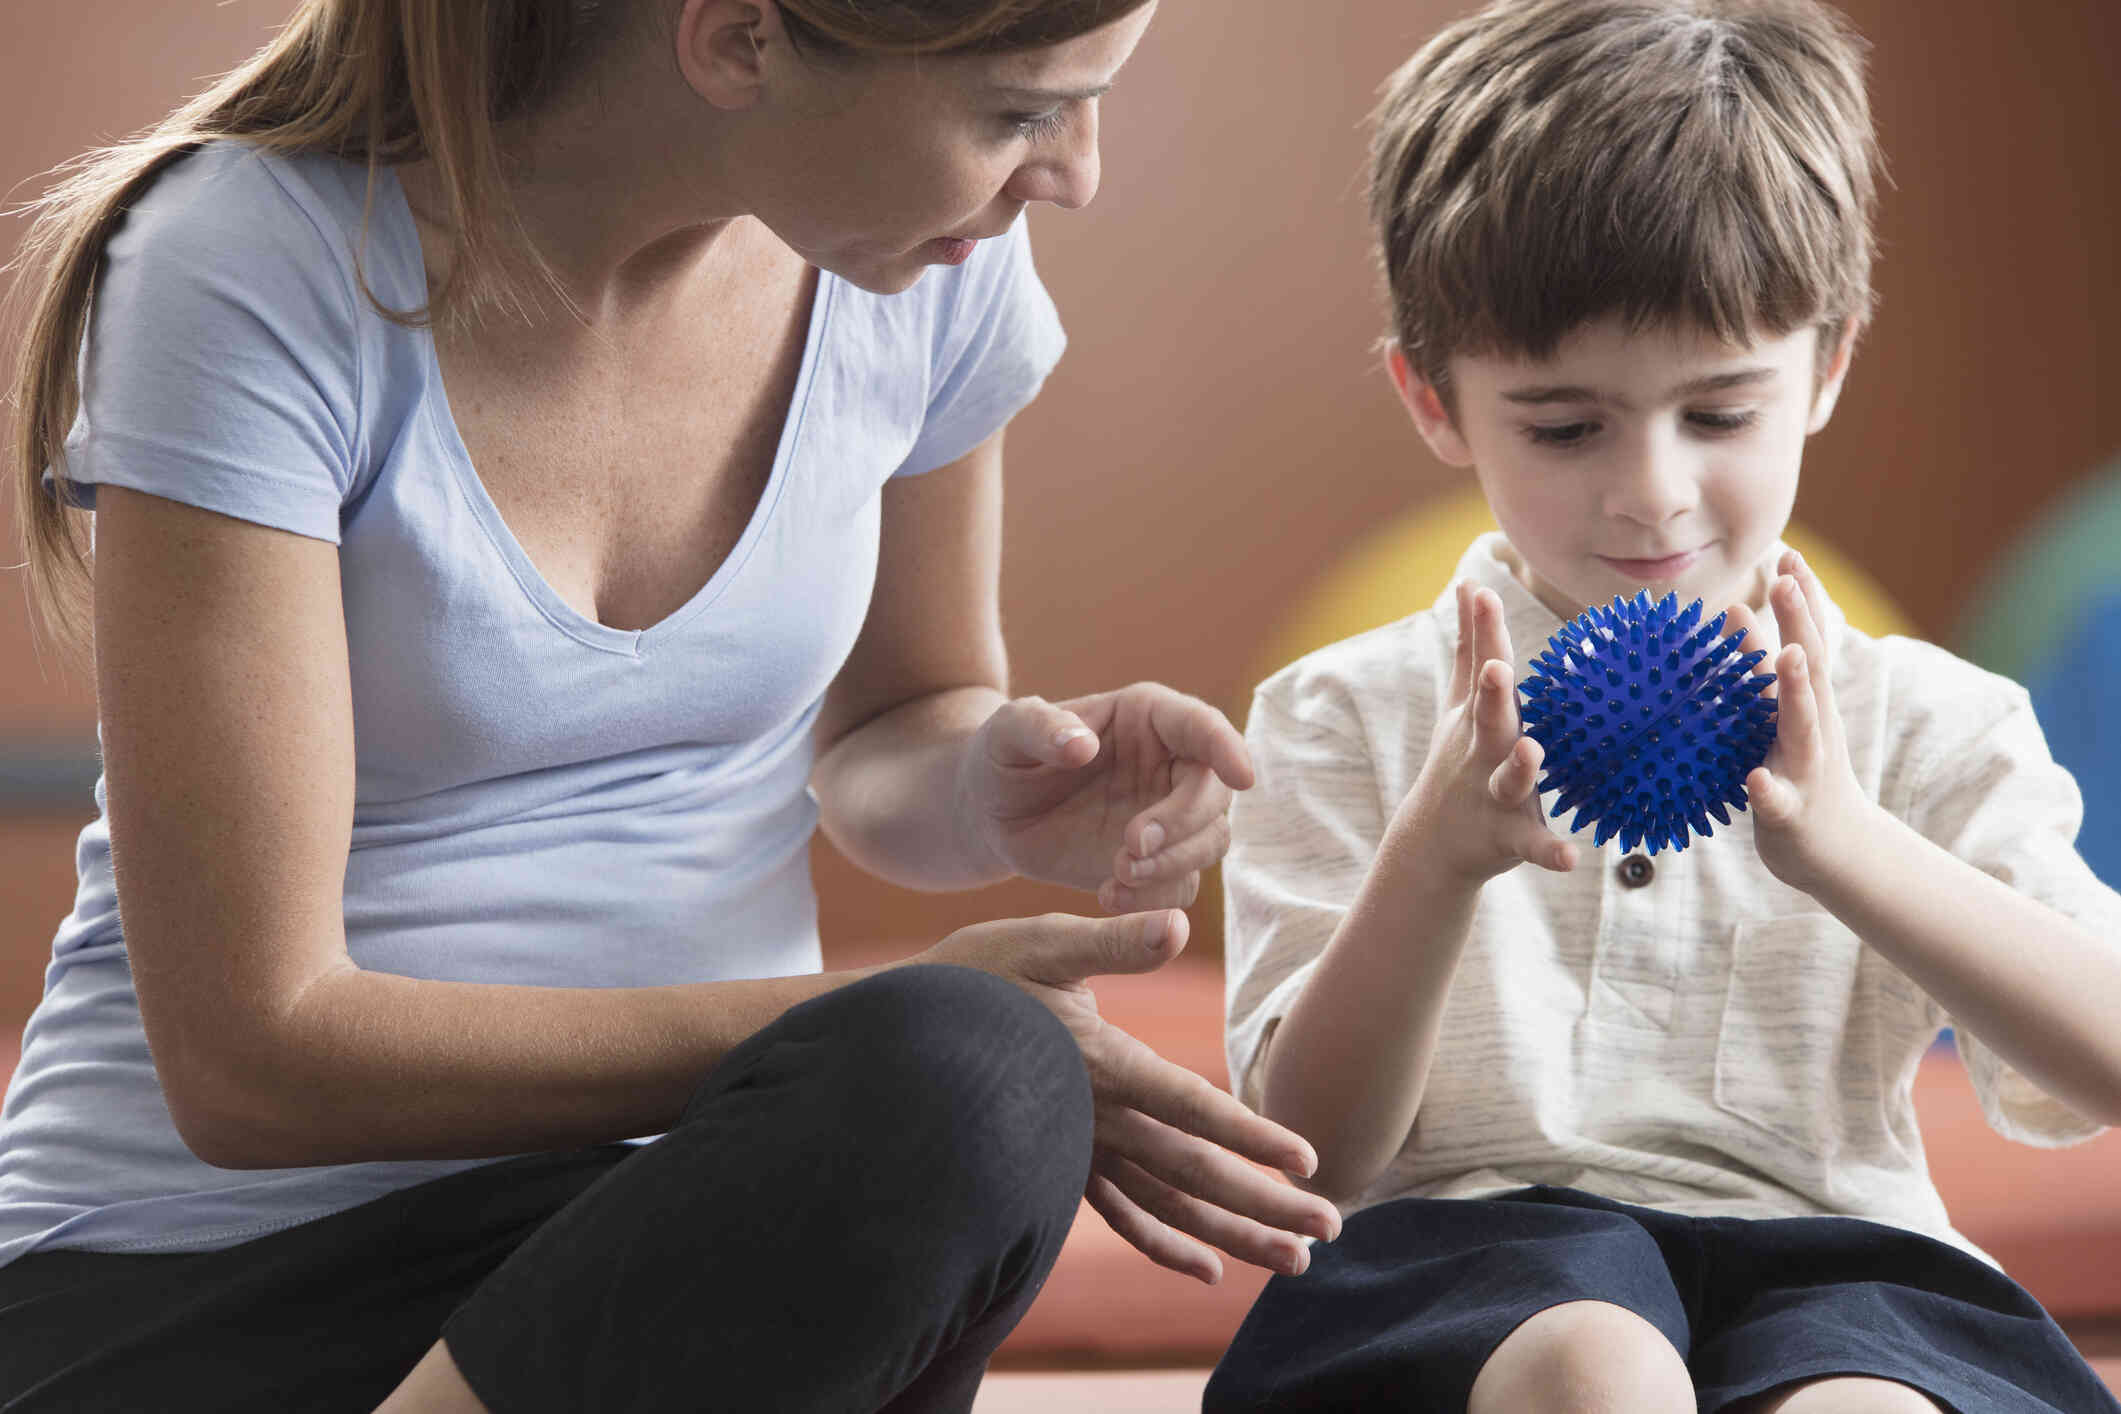 A little boy holds a blue ball shaped toy as a woman sits next to him and talks to him.